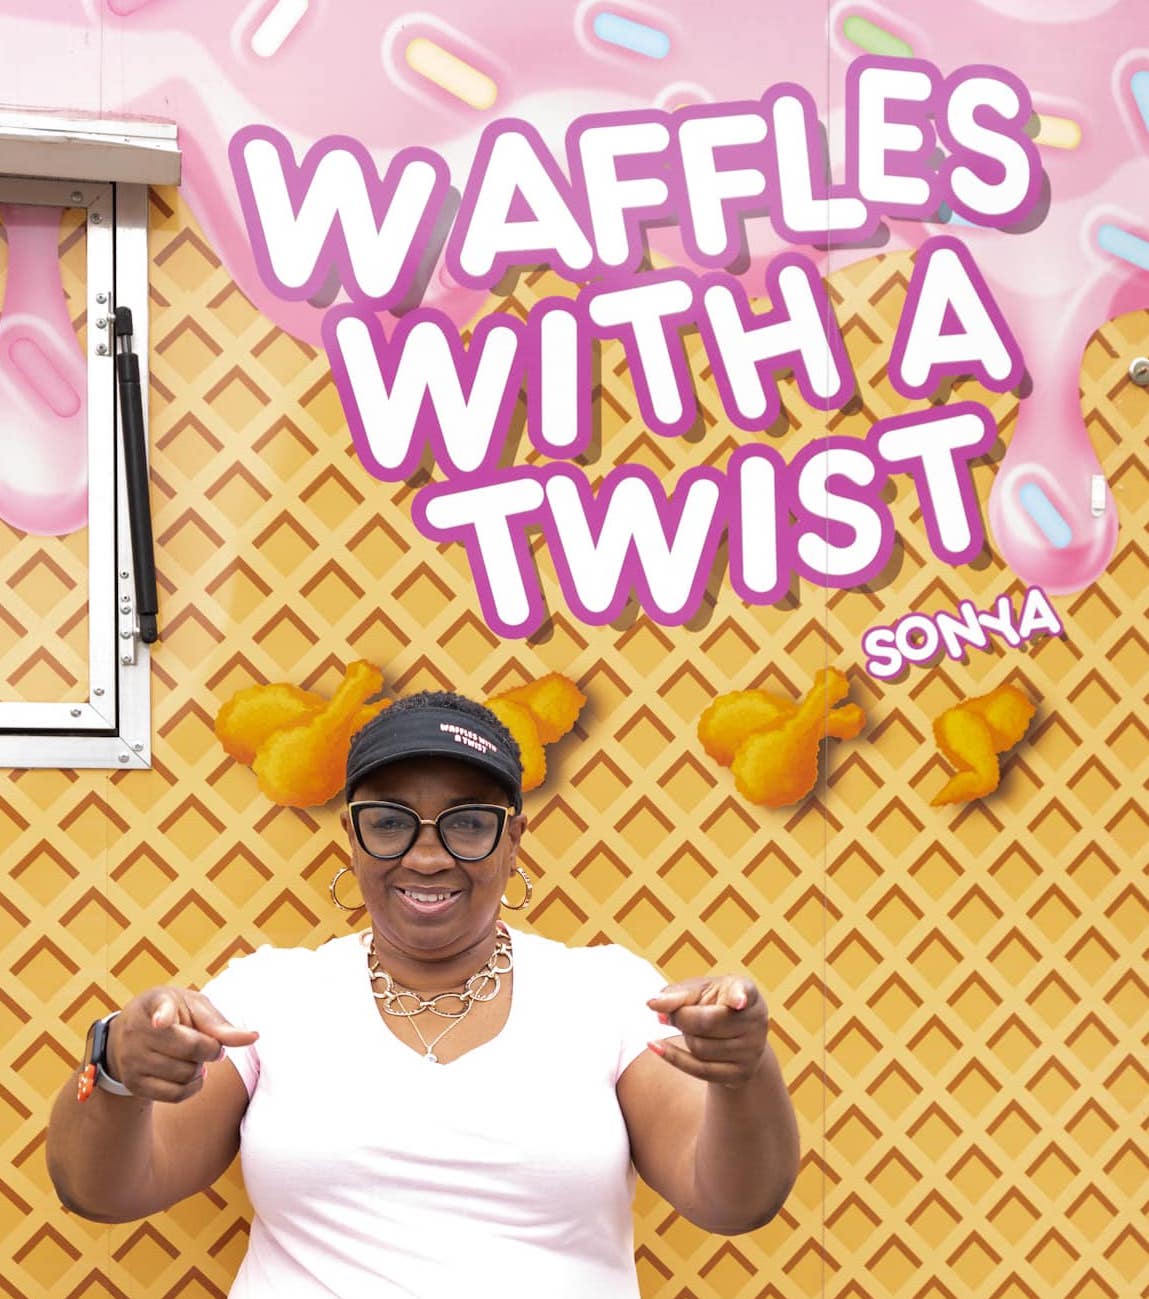 Waffles With a Twist hits Center, Texas 